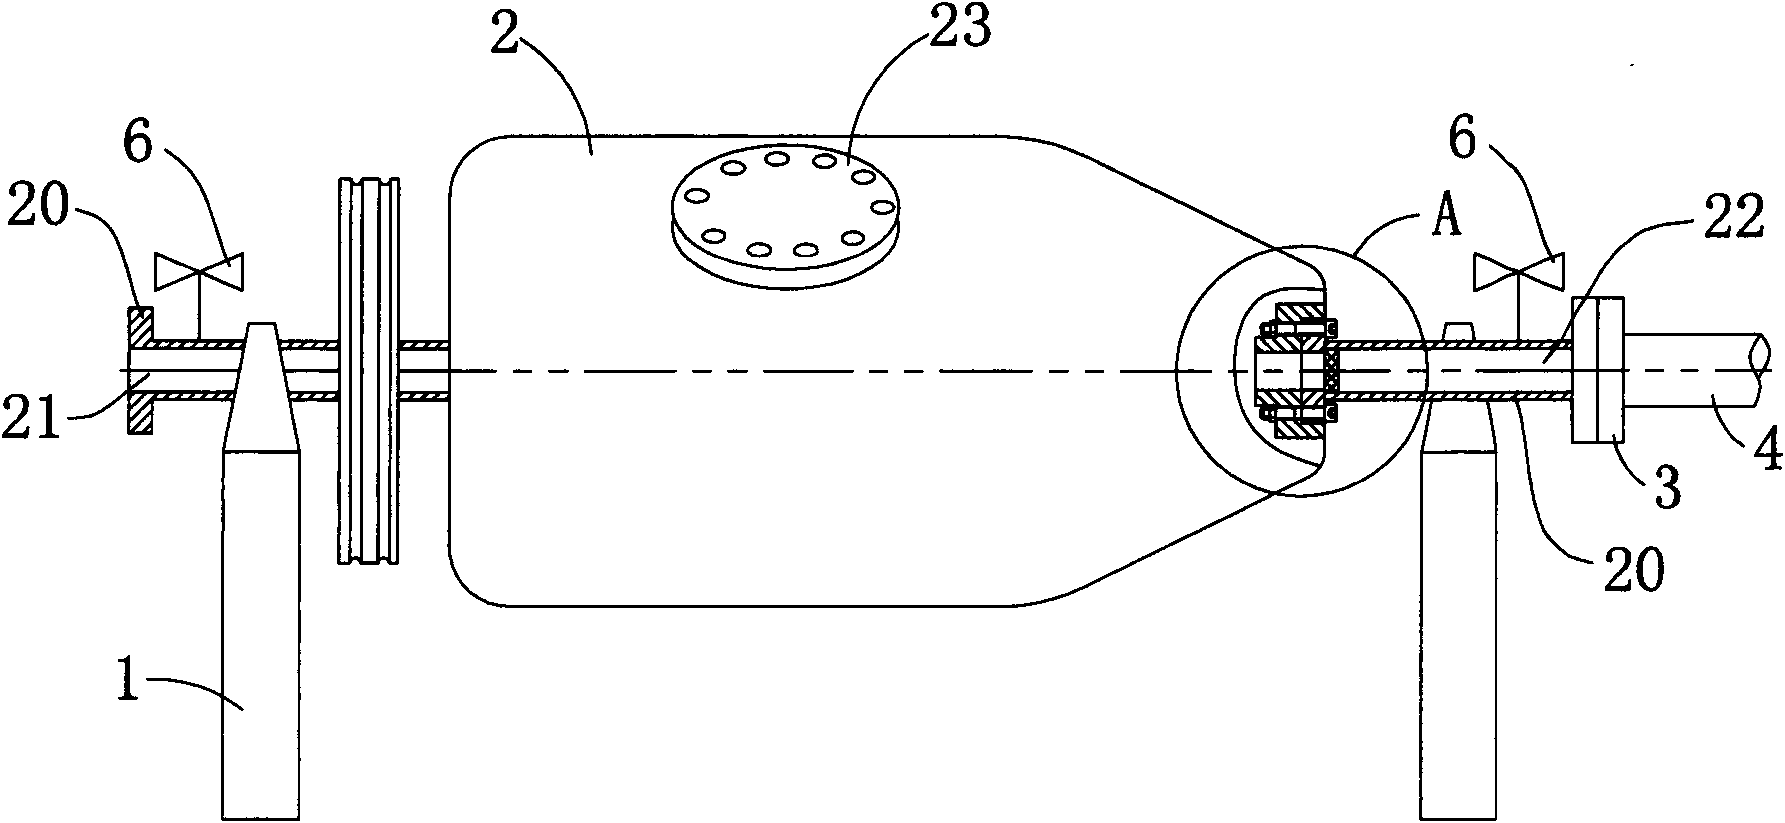 Improved structure of ball grinder